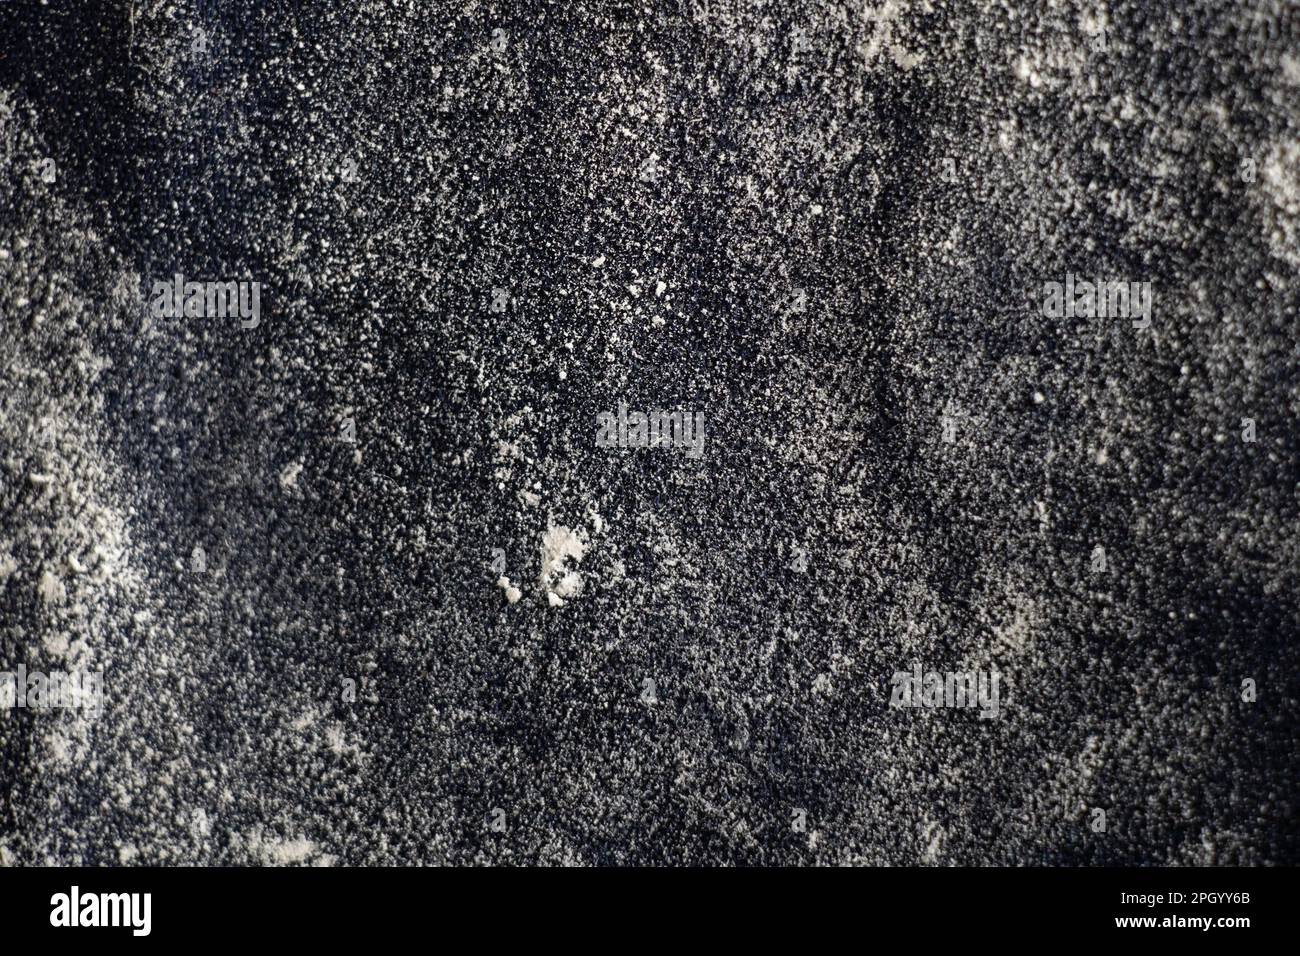 dark cloth in flour as background close up Stock Photo